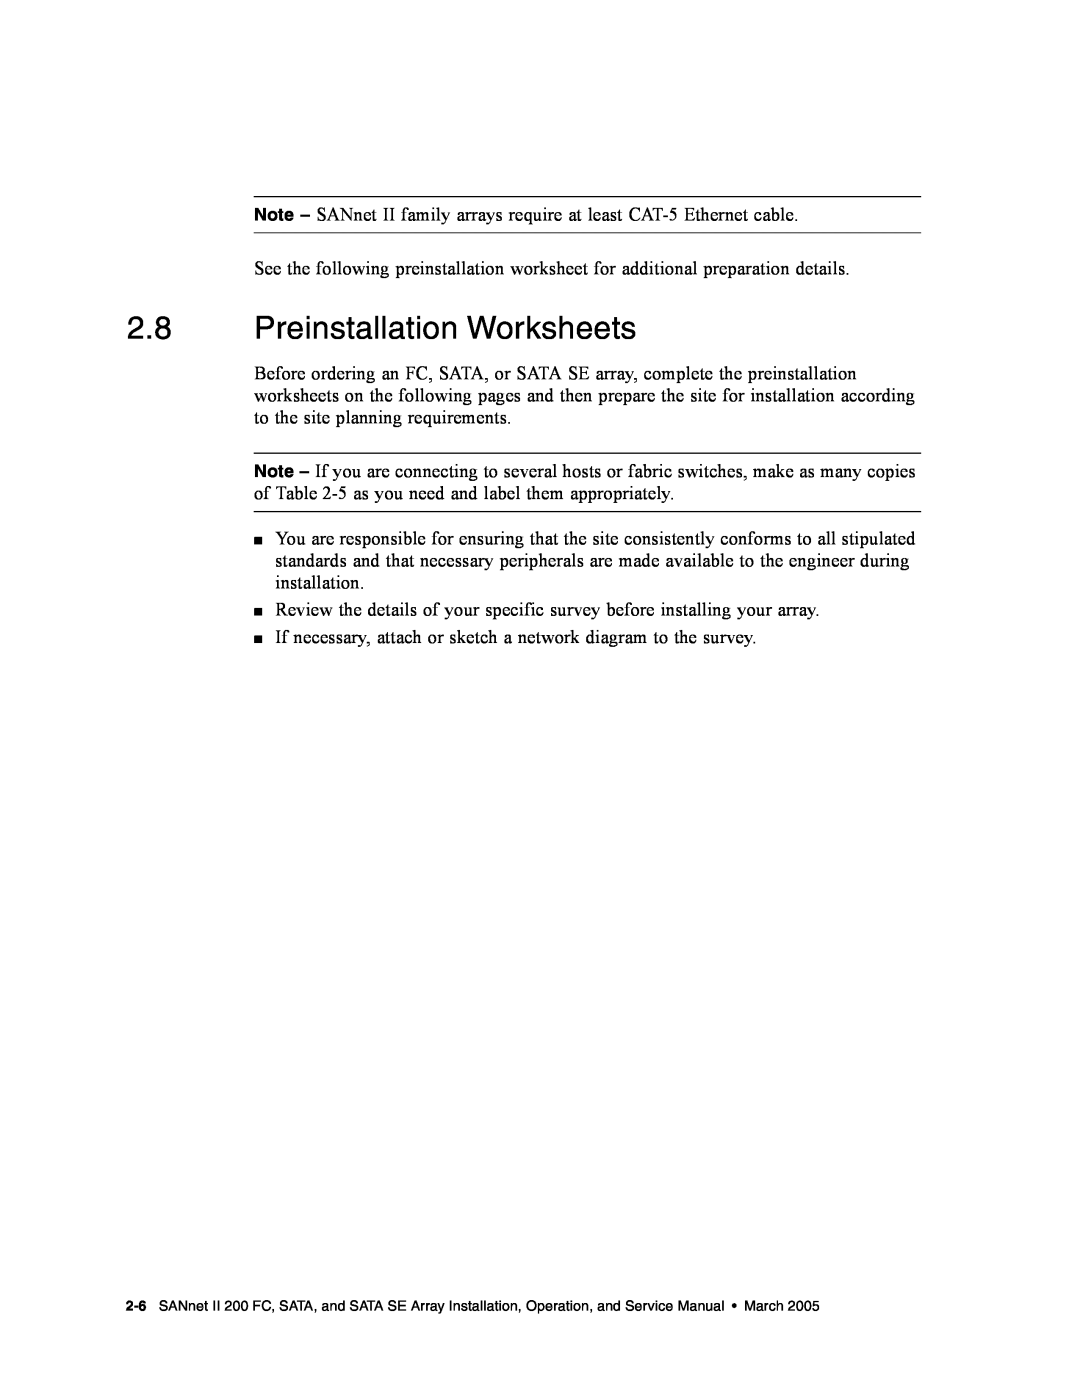 Dot Hill Systems II 200 FC service manual Preinstallation Worksheets 